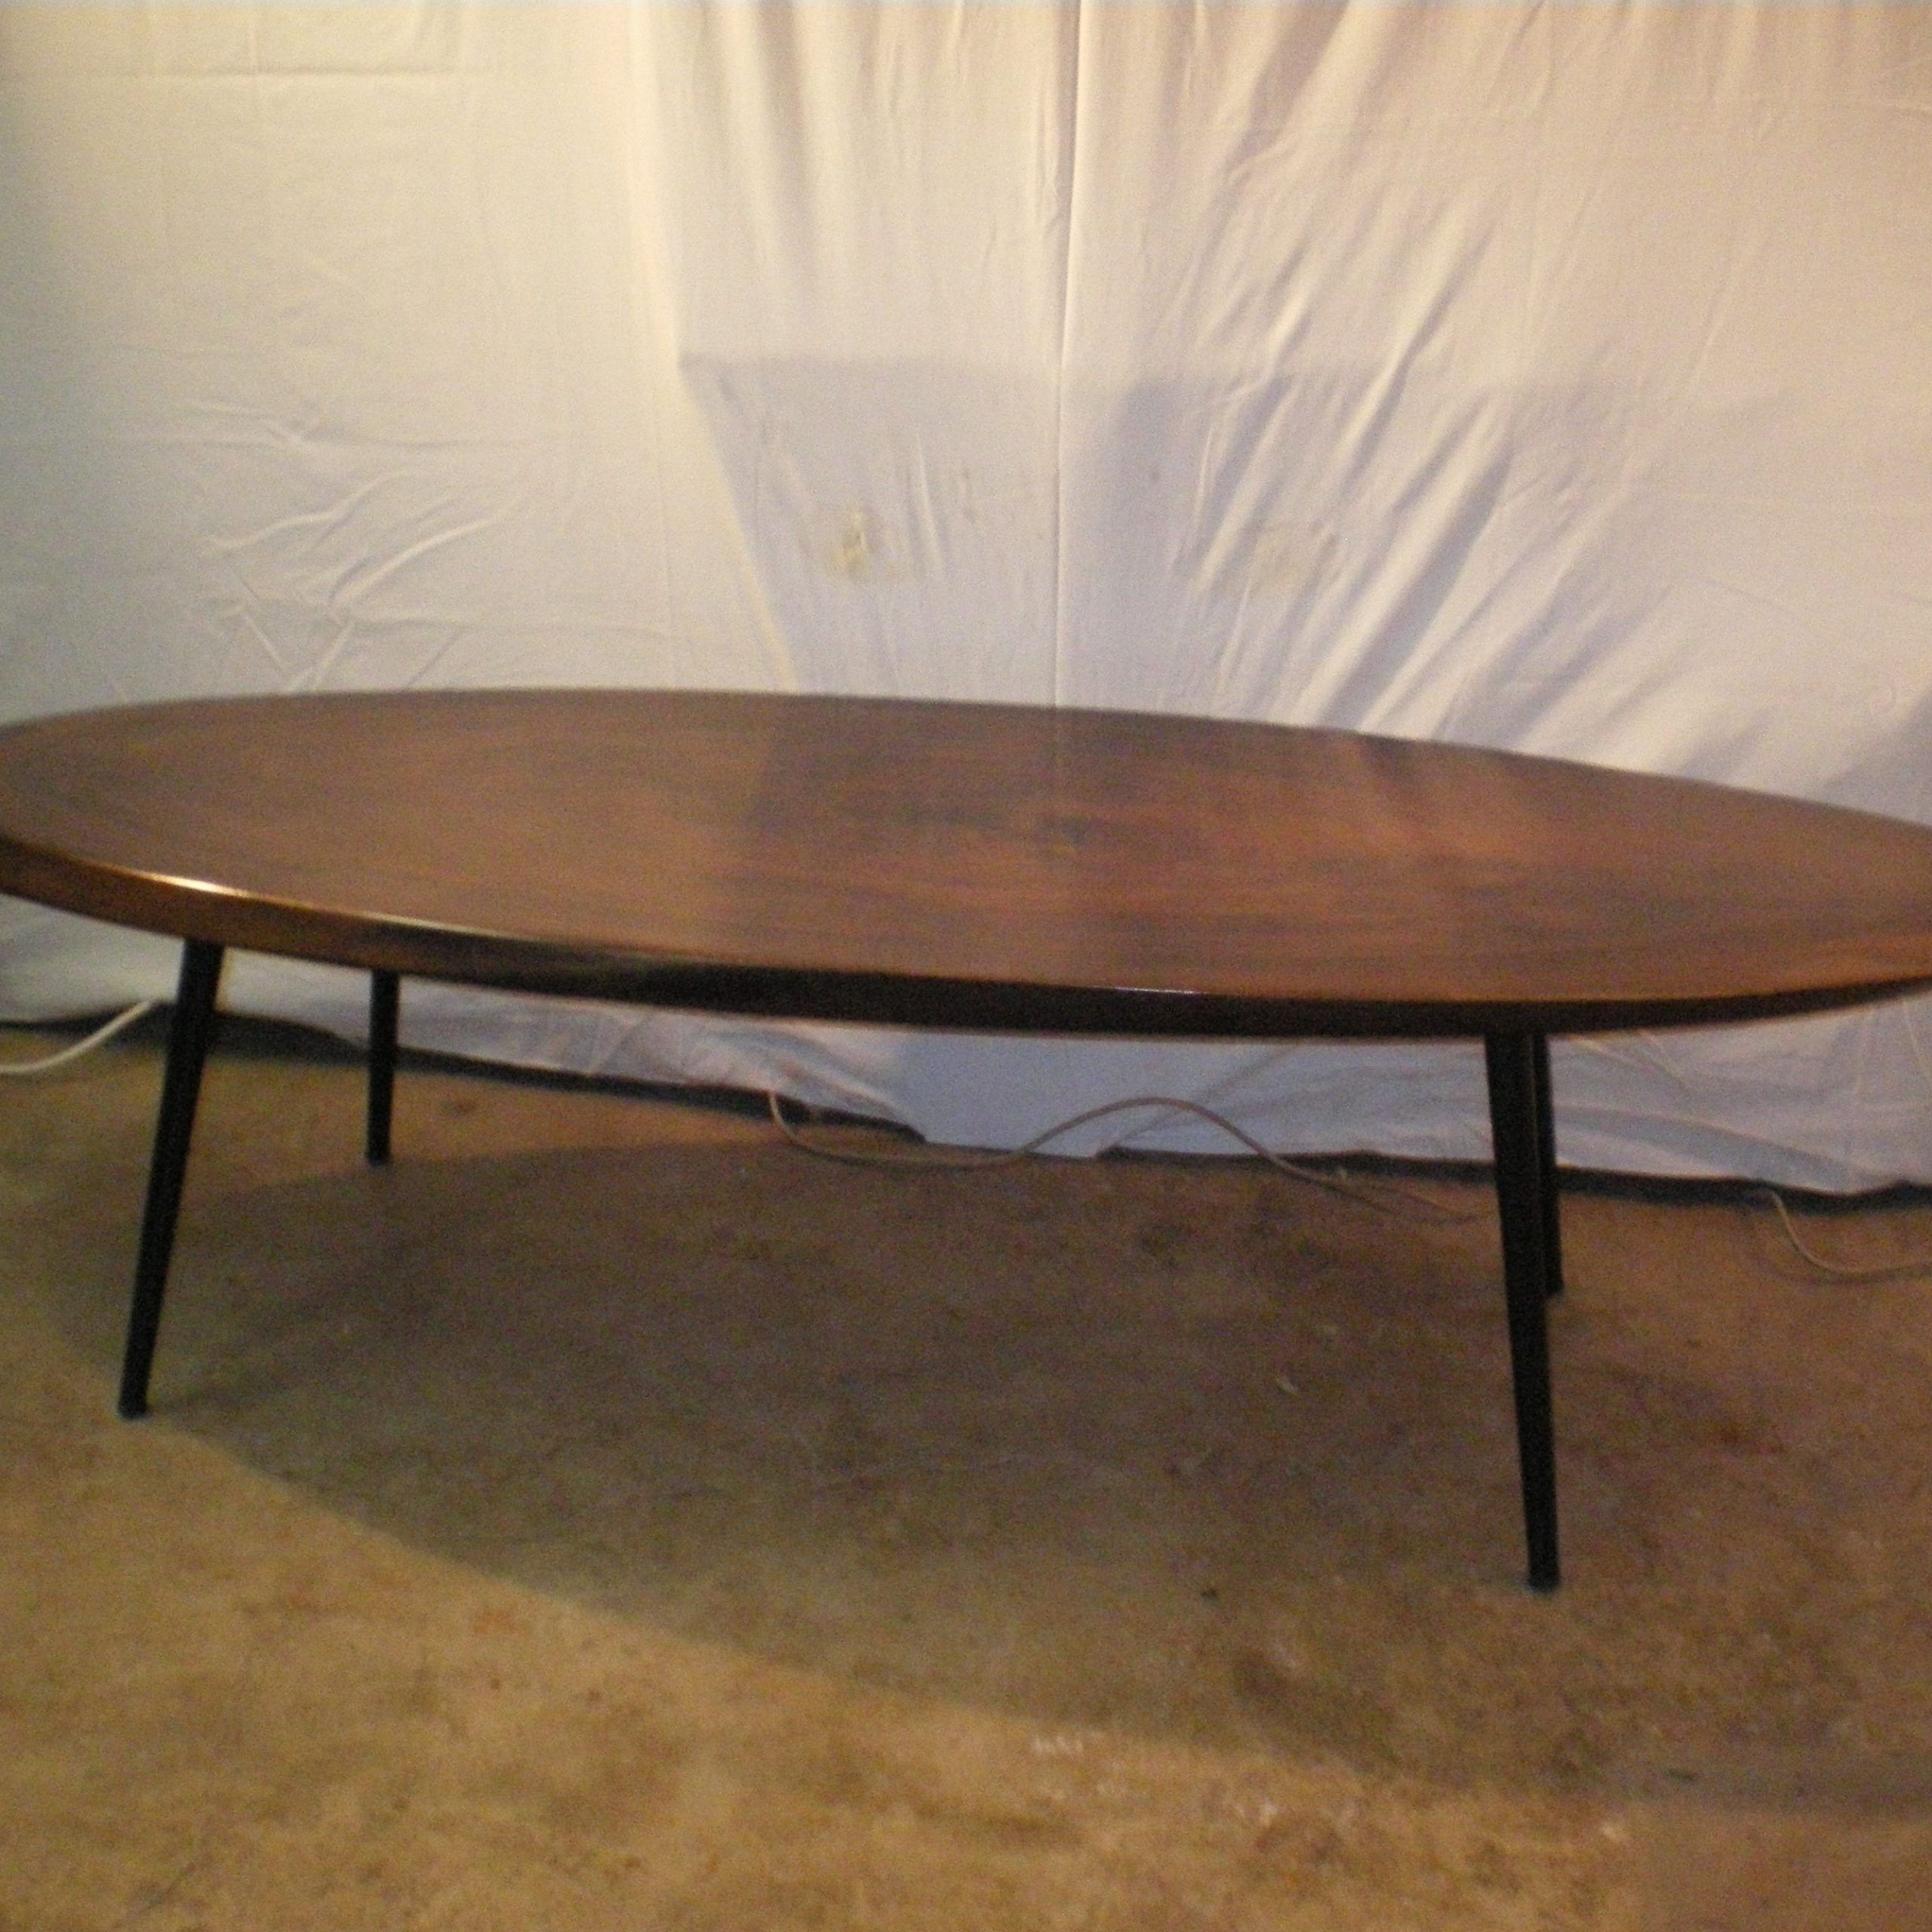 Current Oval Aged Black Iron Coffee Tables In Wood Coffee Table Oval : Tilton Rustic Lodge Reclaimed Wood Iron Oval (View 6 of 10)